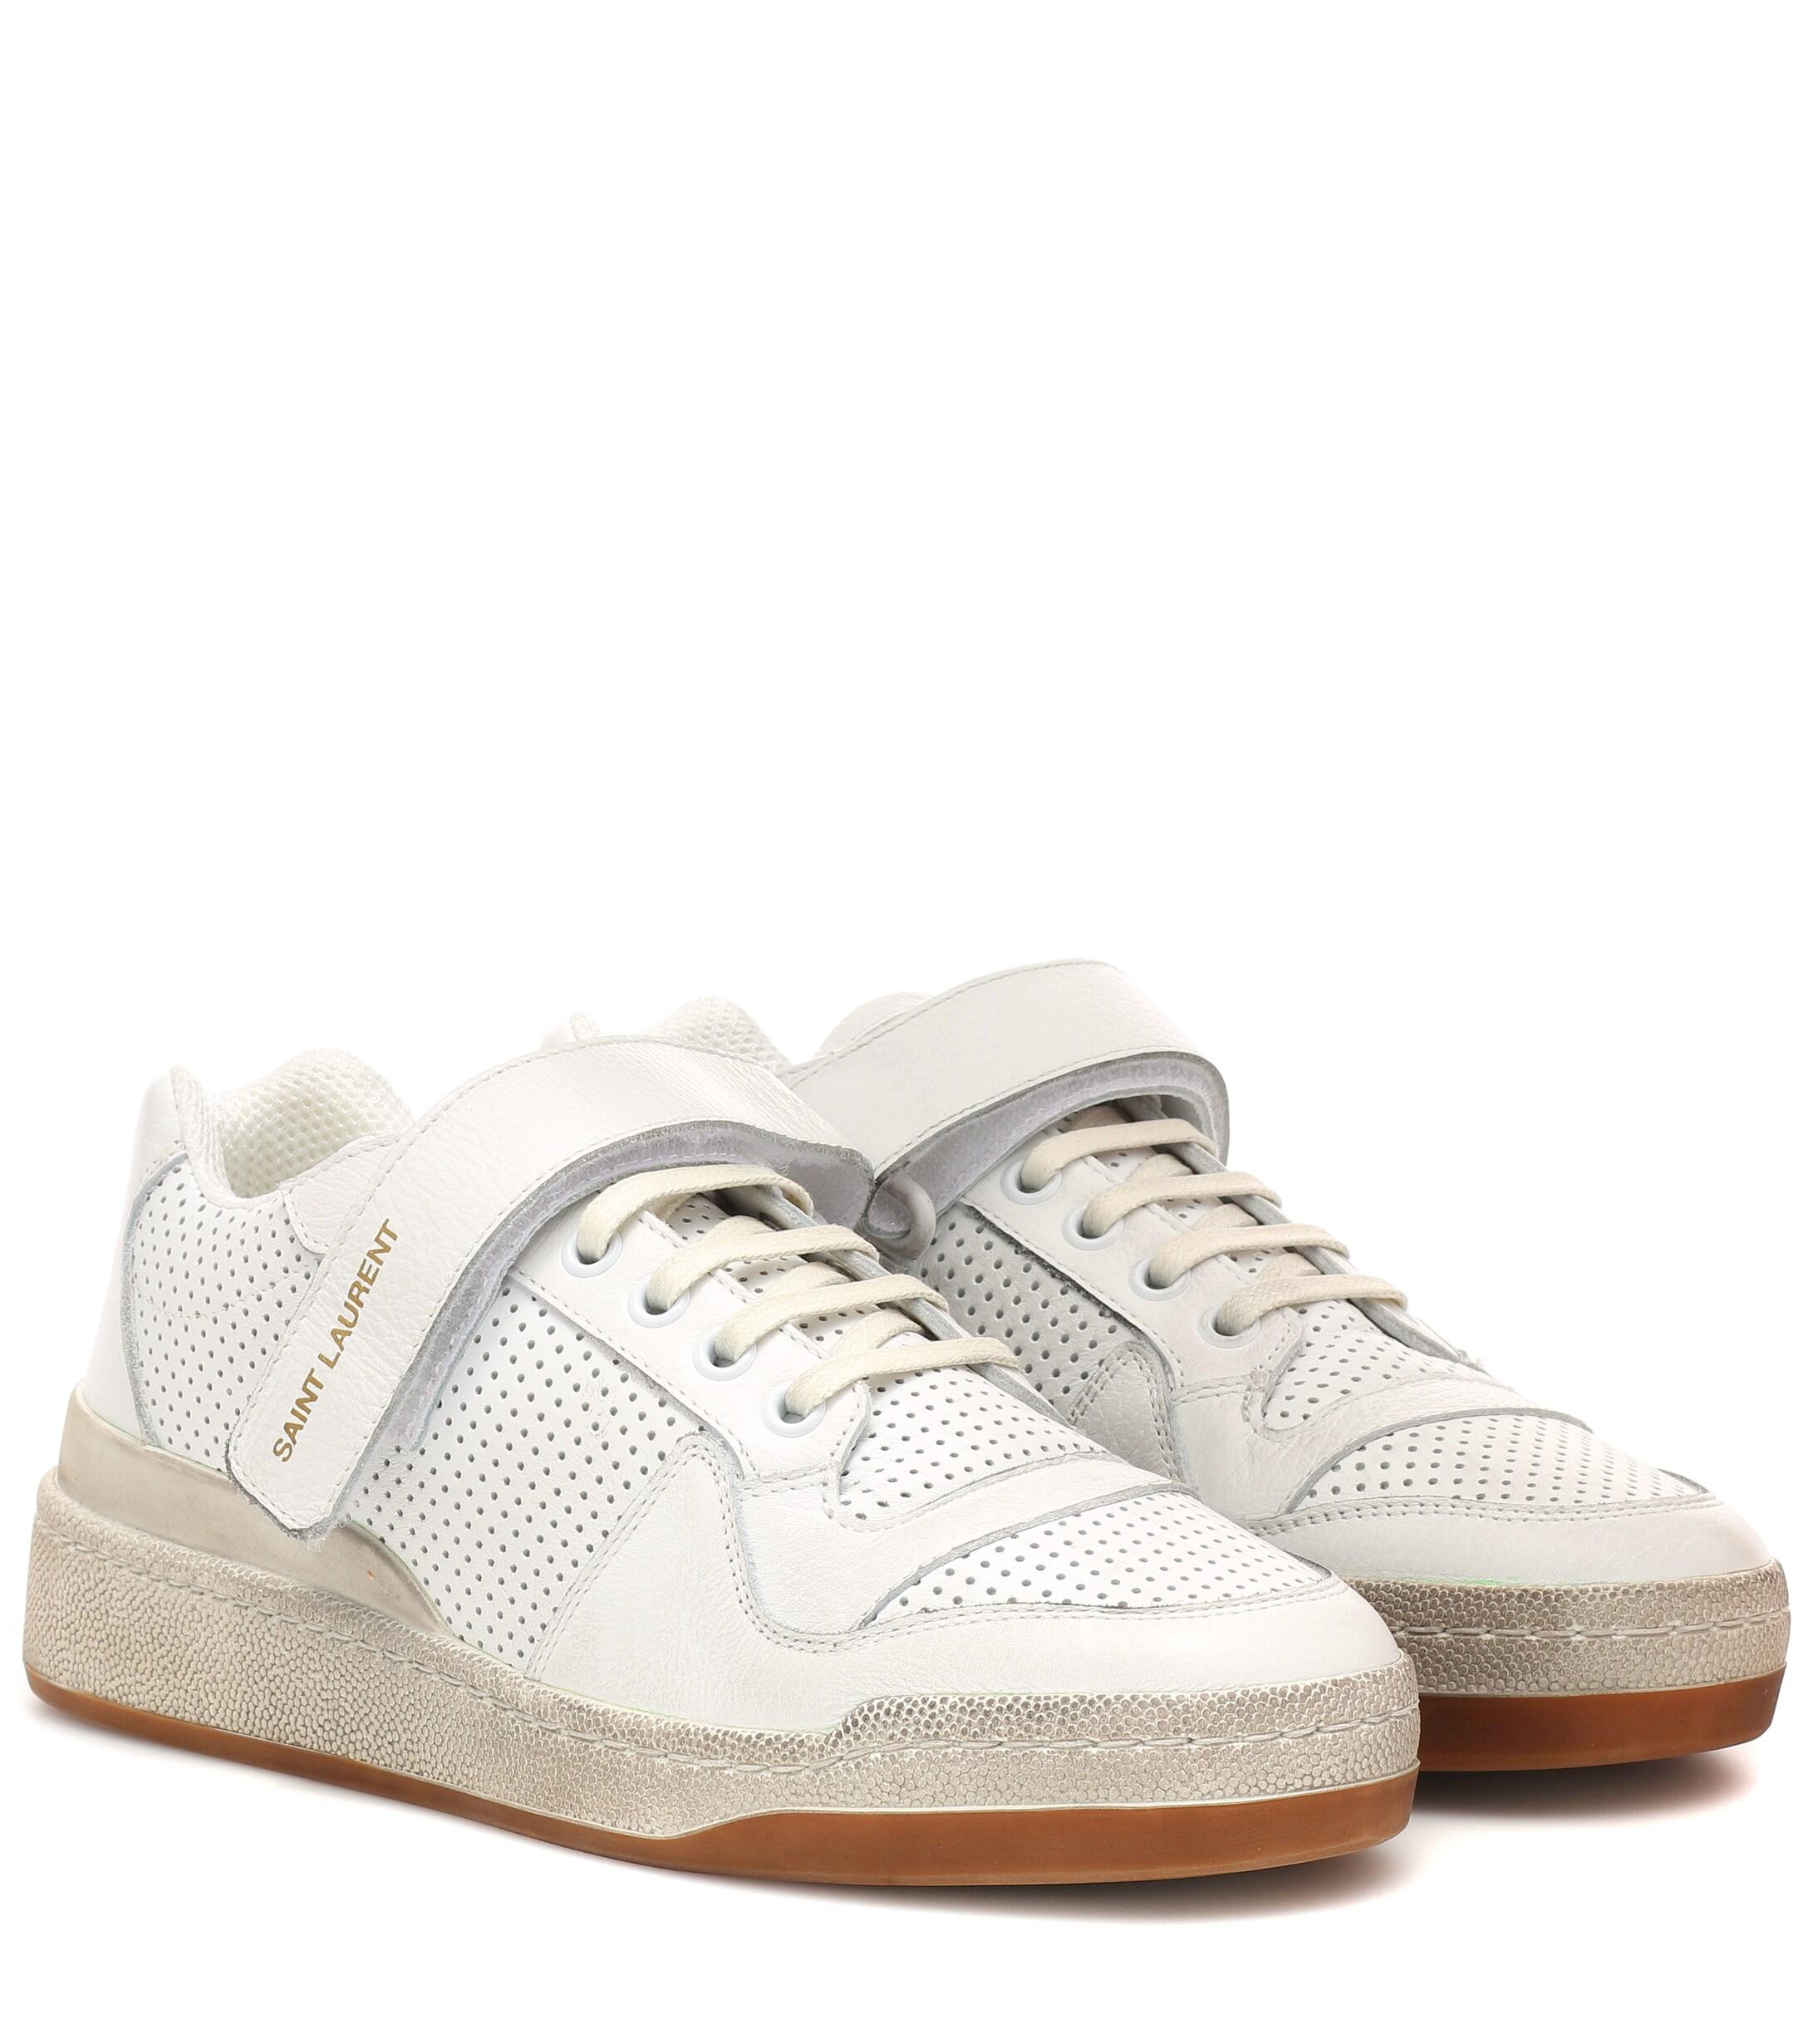 Saint Laurent Sl24 Leather Sneakers in bl op (White) - Lyst